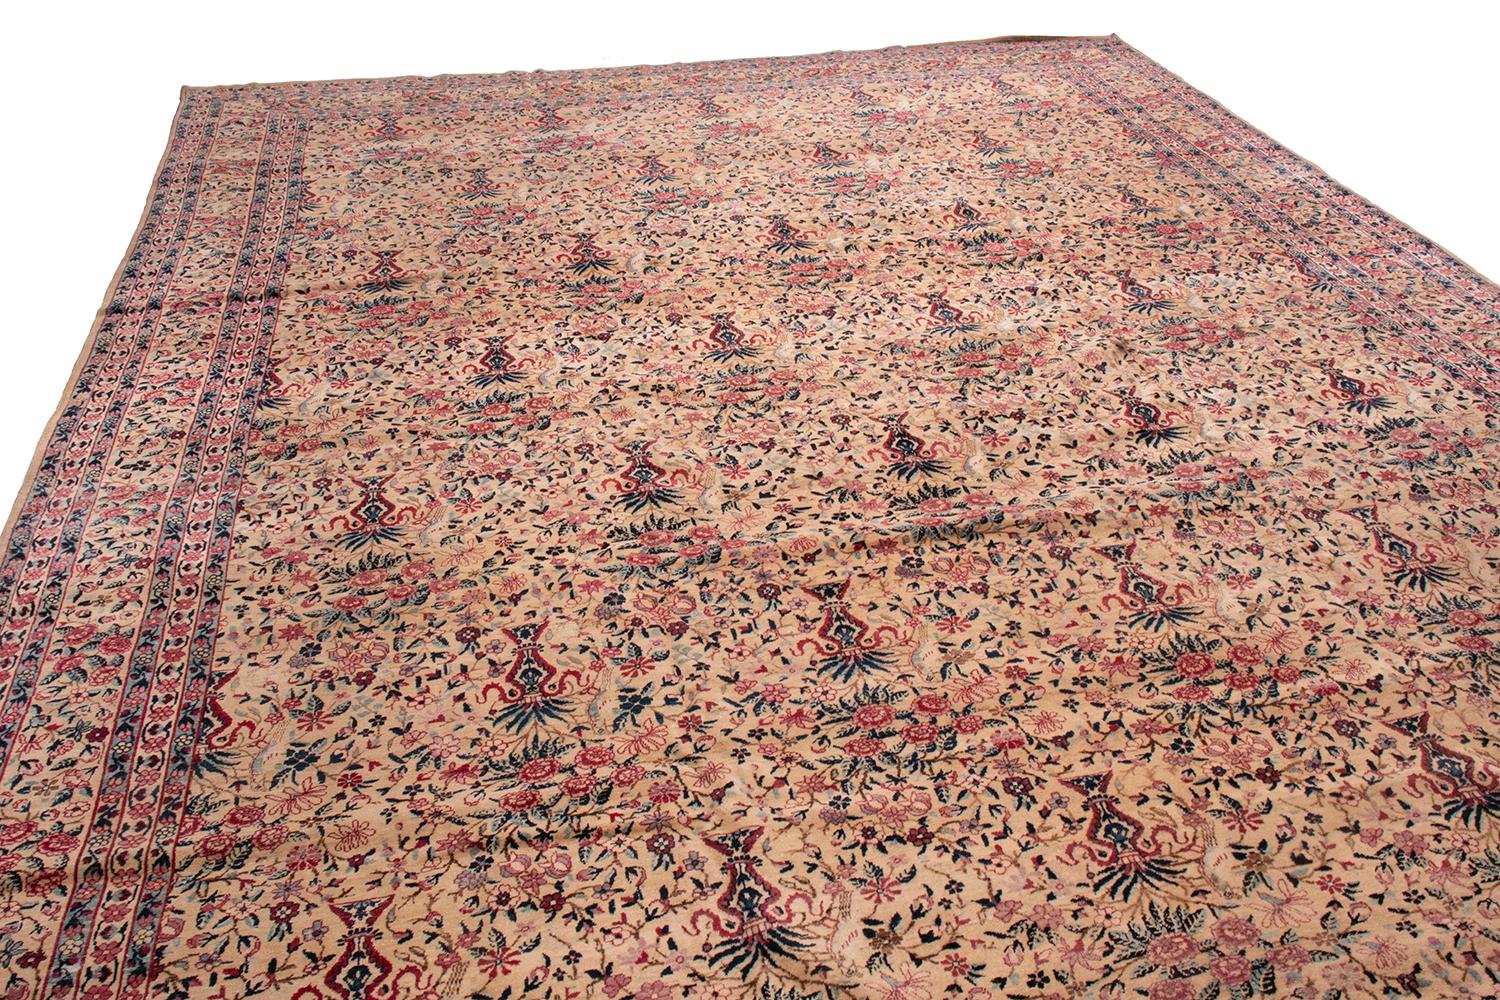 Persian Hand Knotted Antique Kerman Lavar Rug in Beige Pink and Blue Floral Pattern